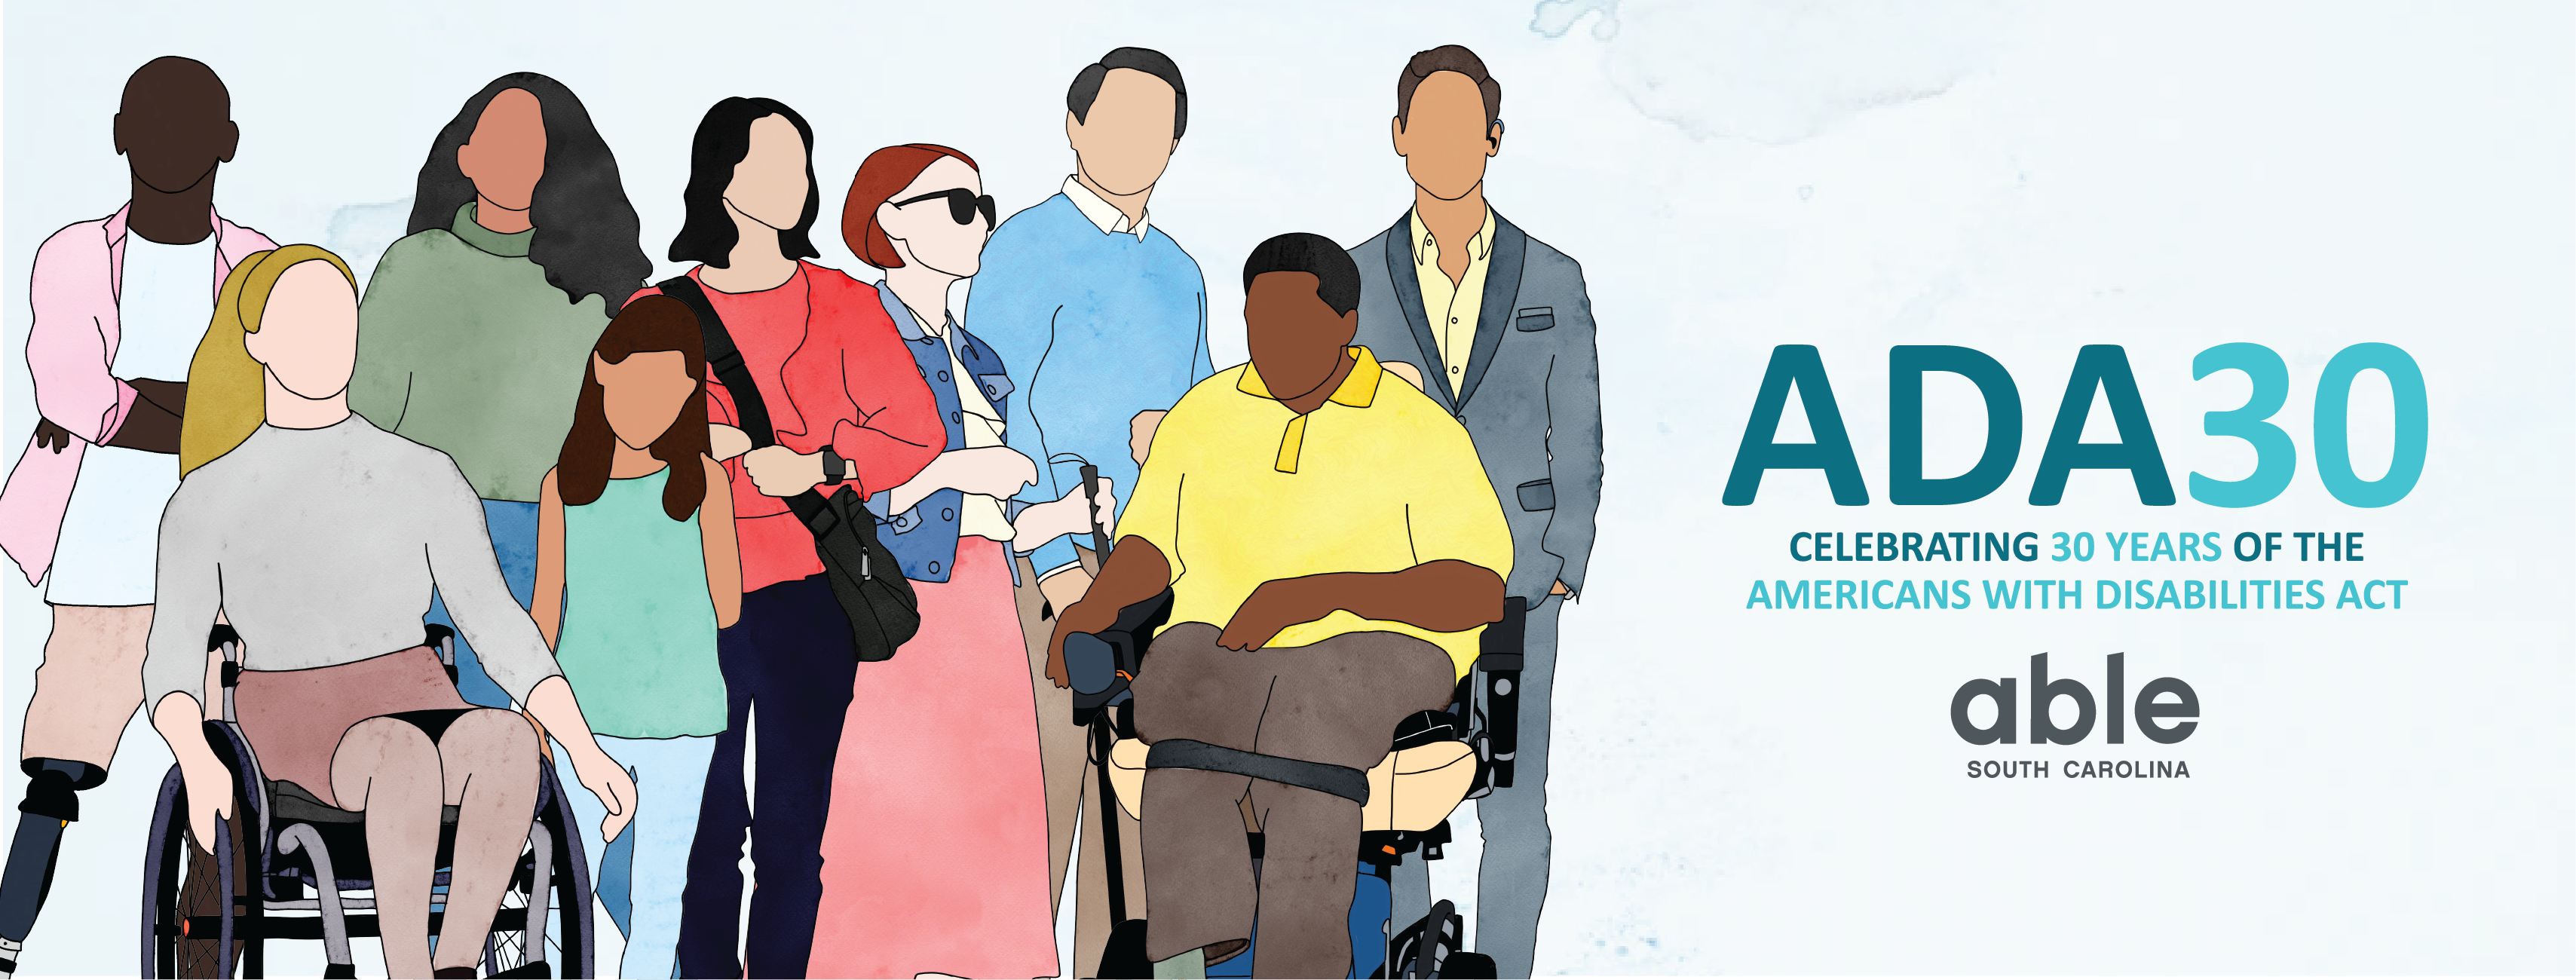 a faintly light blue marbled background. On the left is an illustration of 9 diverse people with various disabilities. On the right in teal is the text 'ADA 30 Celebrating 30 Years of the Americans with Disabilities Act' with the Able SC logo below it.